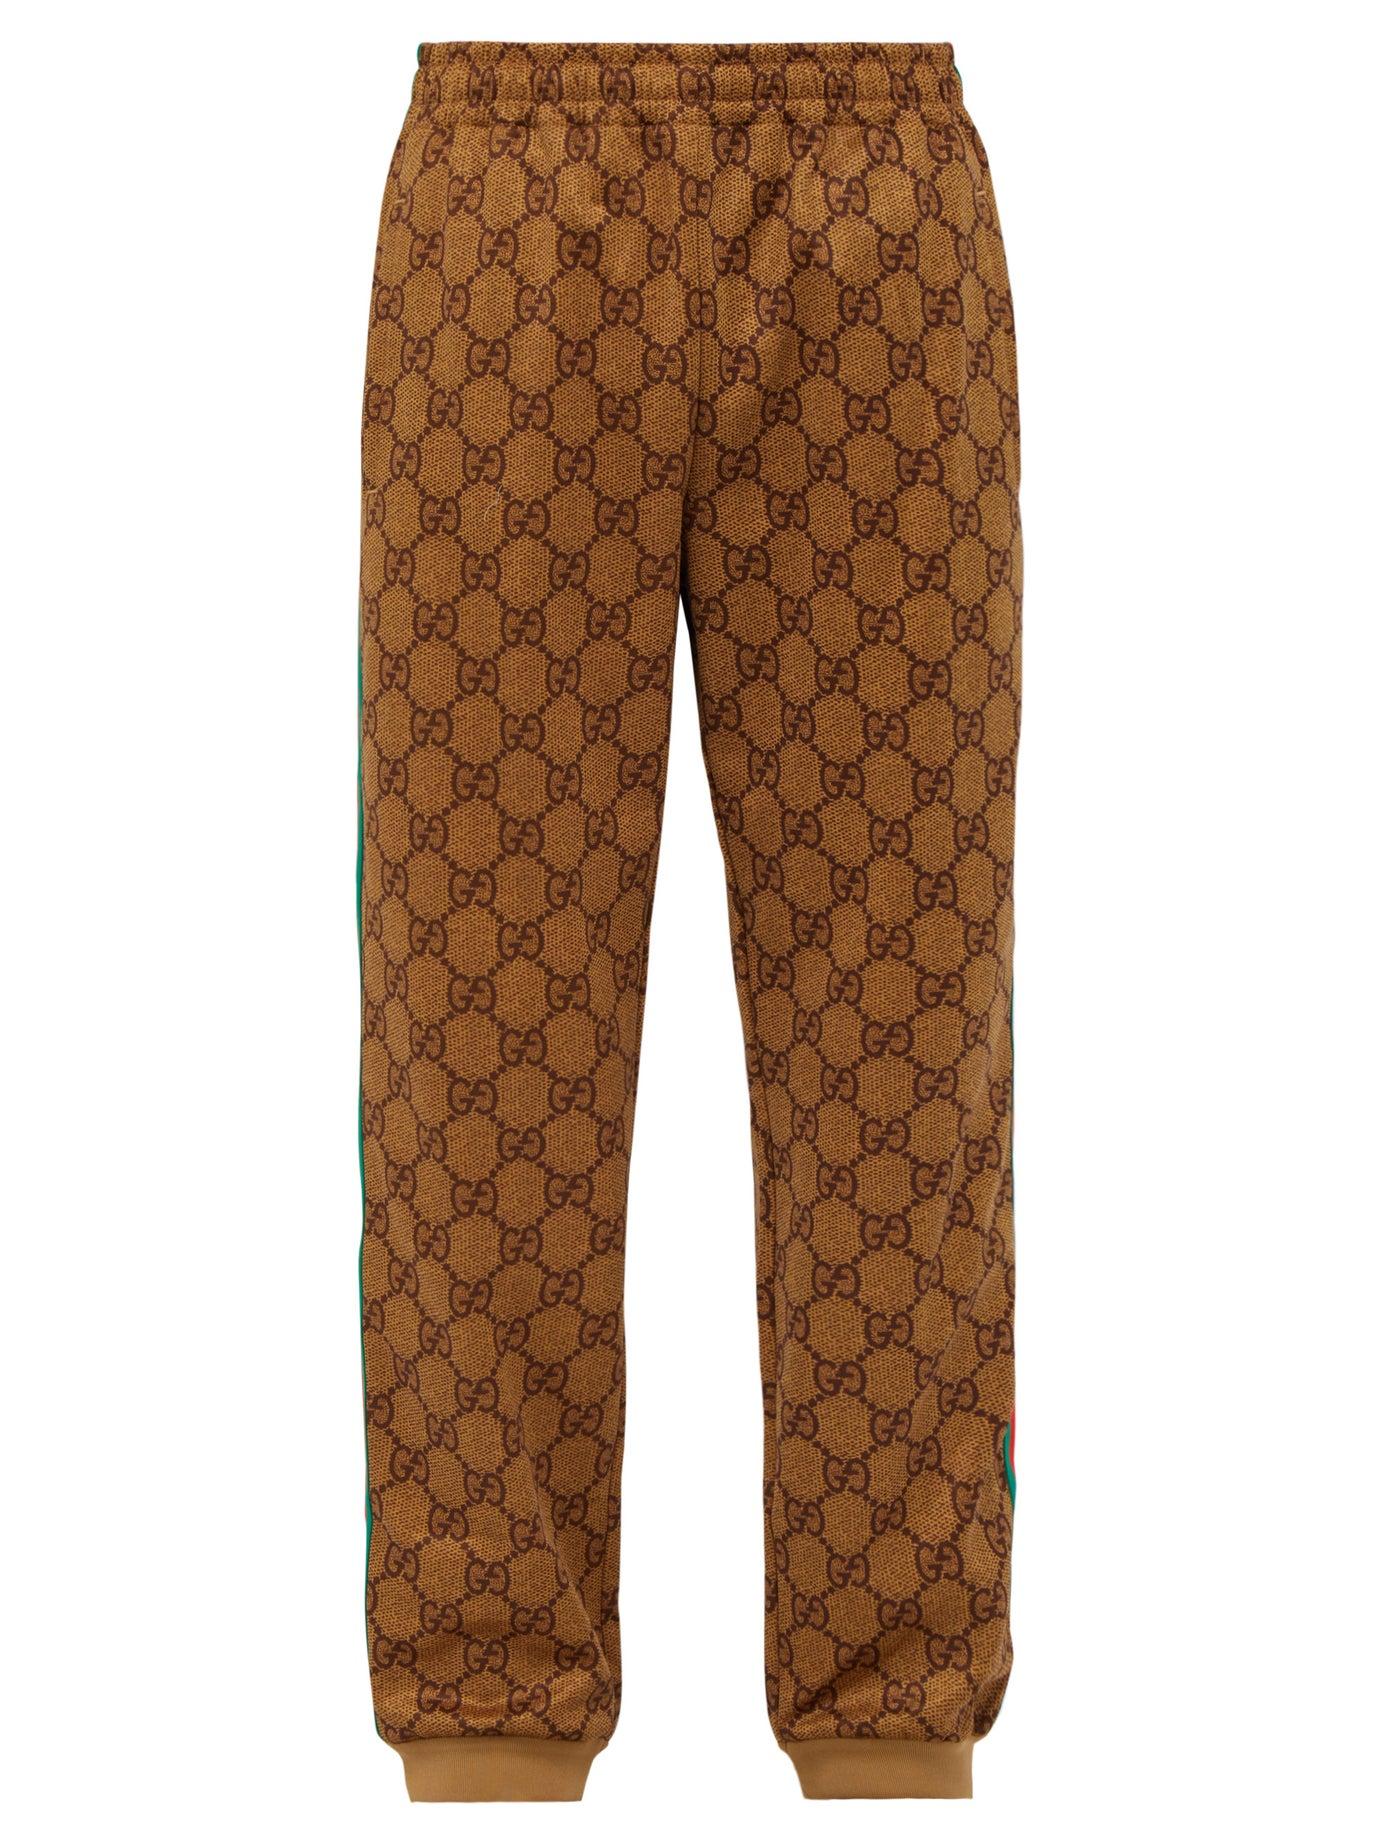 Gucci Gg Supreme Web-stripe Track Pants in Camel (Brown) for Men - Lyst